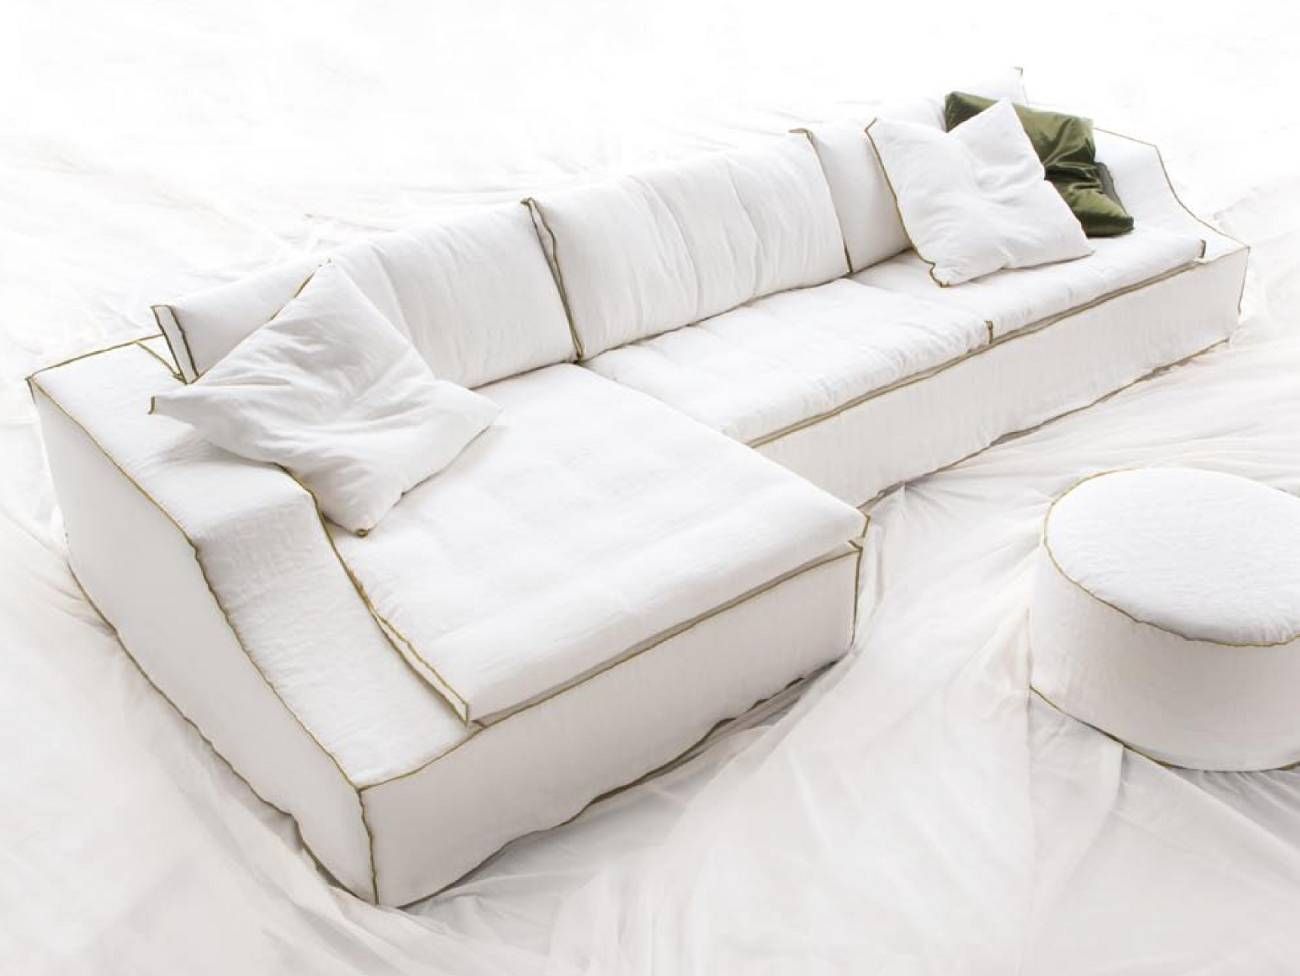 Furniture Home: The Most Popular Shabby Chic Sectional Sofa 60 With Regard To Shabby Chic Sectional Couches (View 5 of 15)